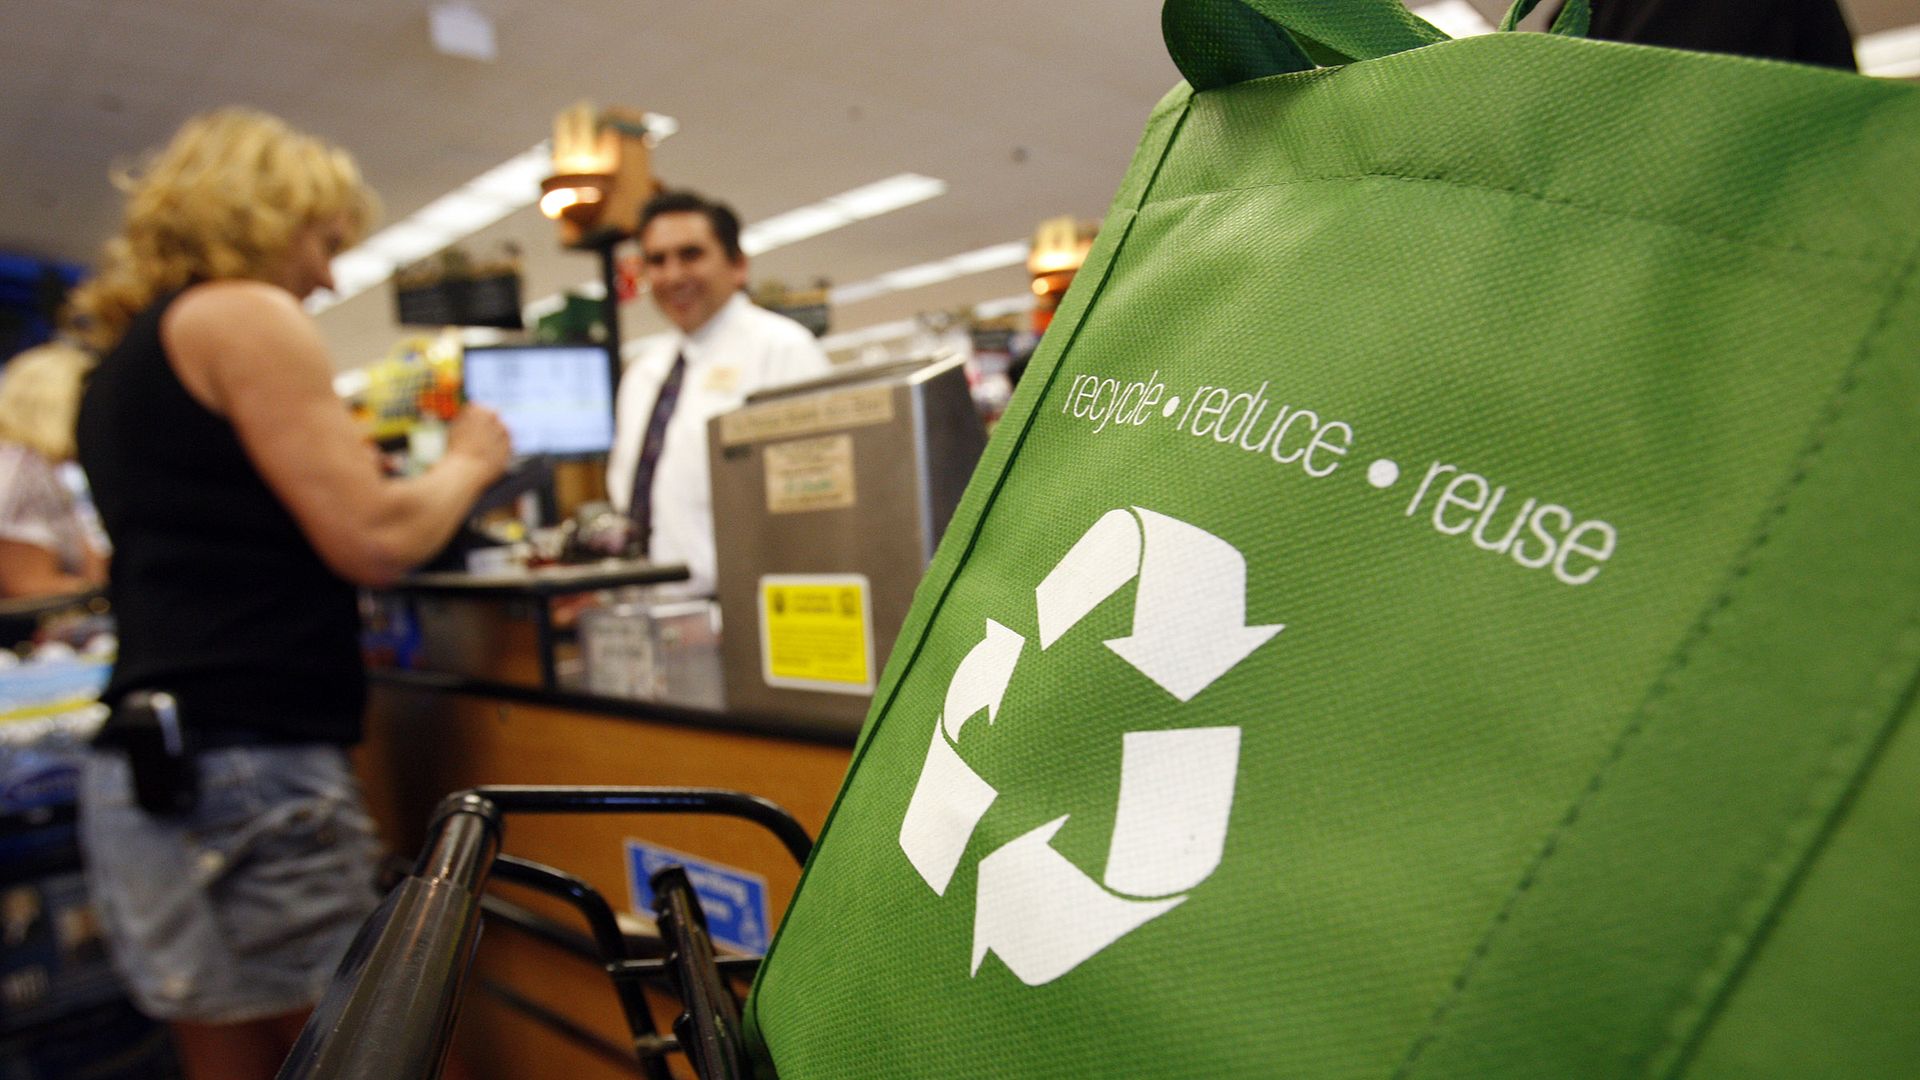 Woman checks out in grocery store in background, with reduce recycle reuse green bag in front.